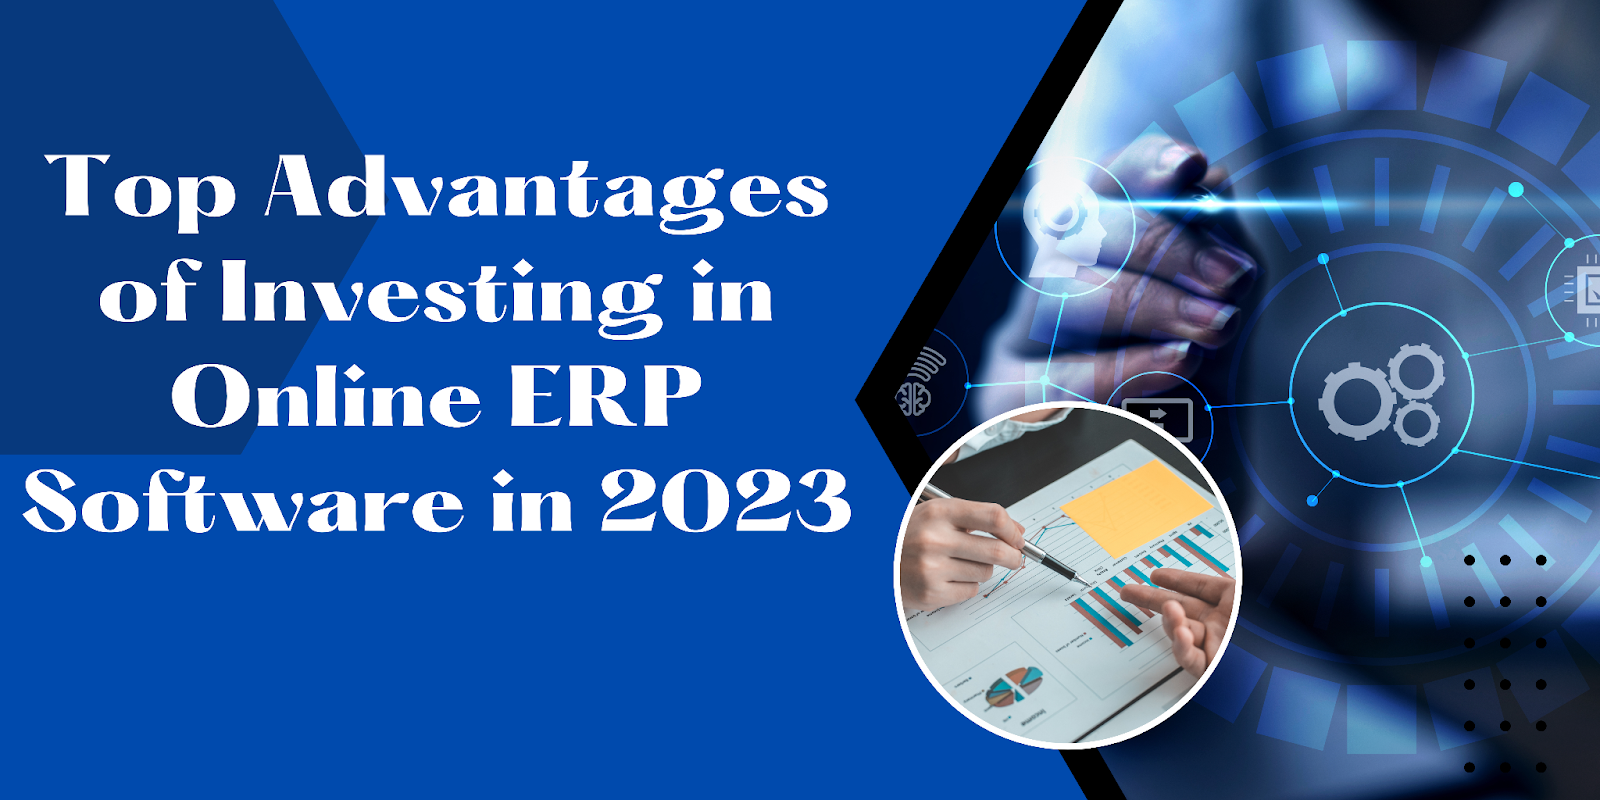 Top Advantages of Investing in Online ERP Software In 2023